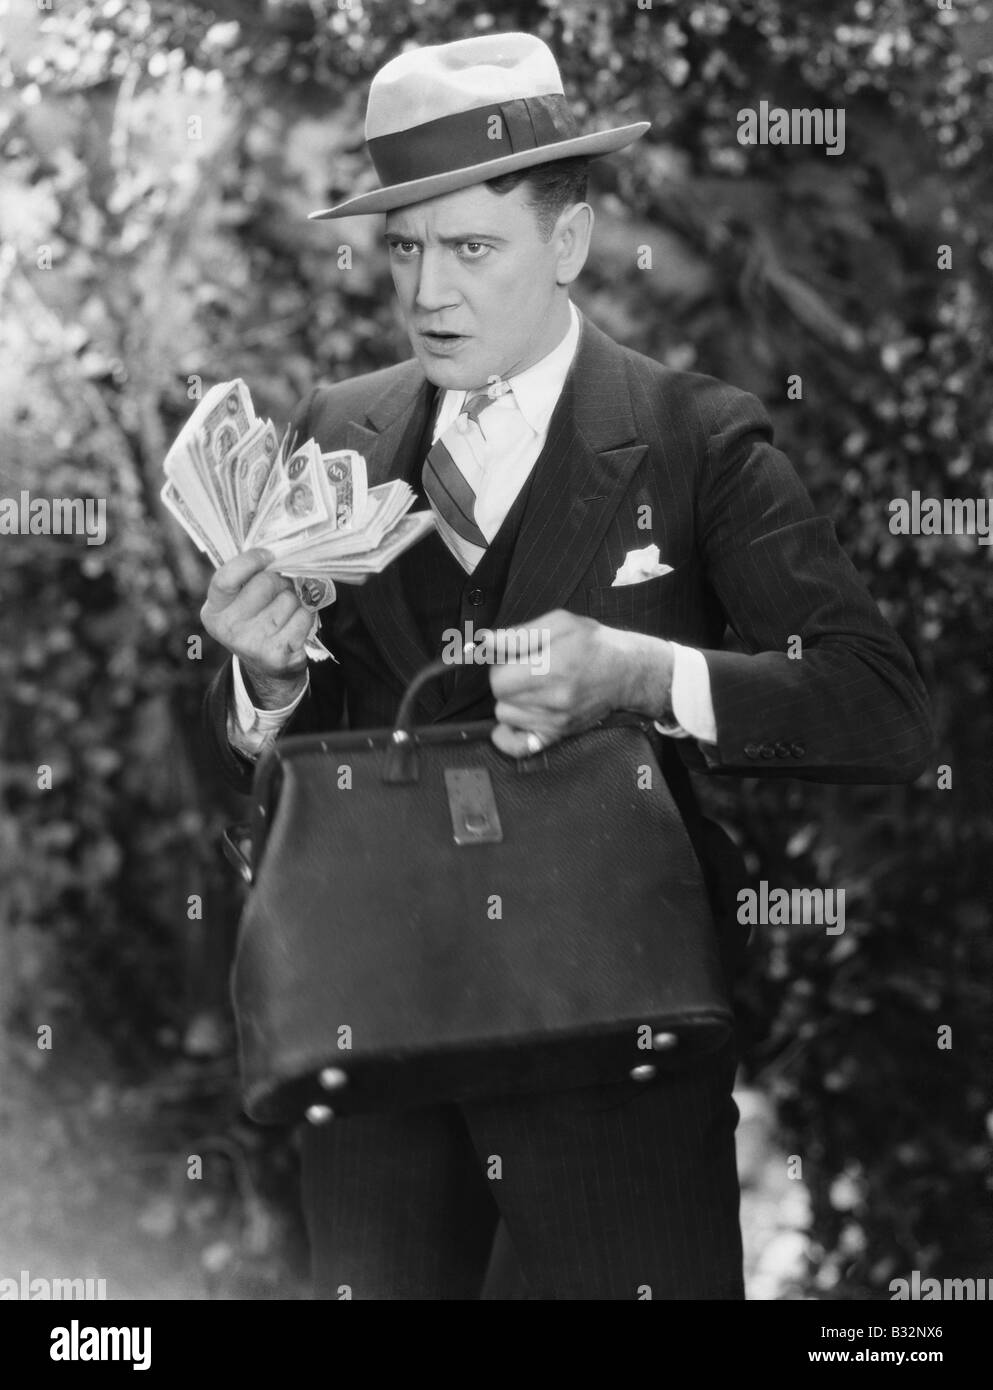 Man with bag full of cash Stock Photo